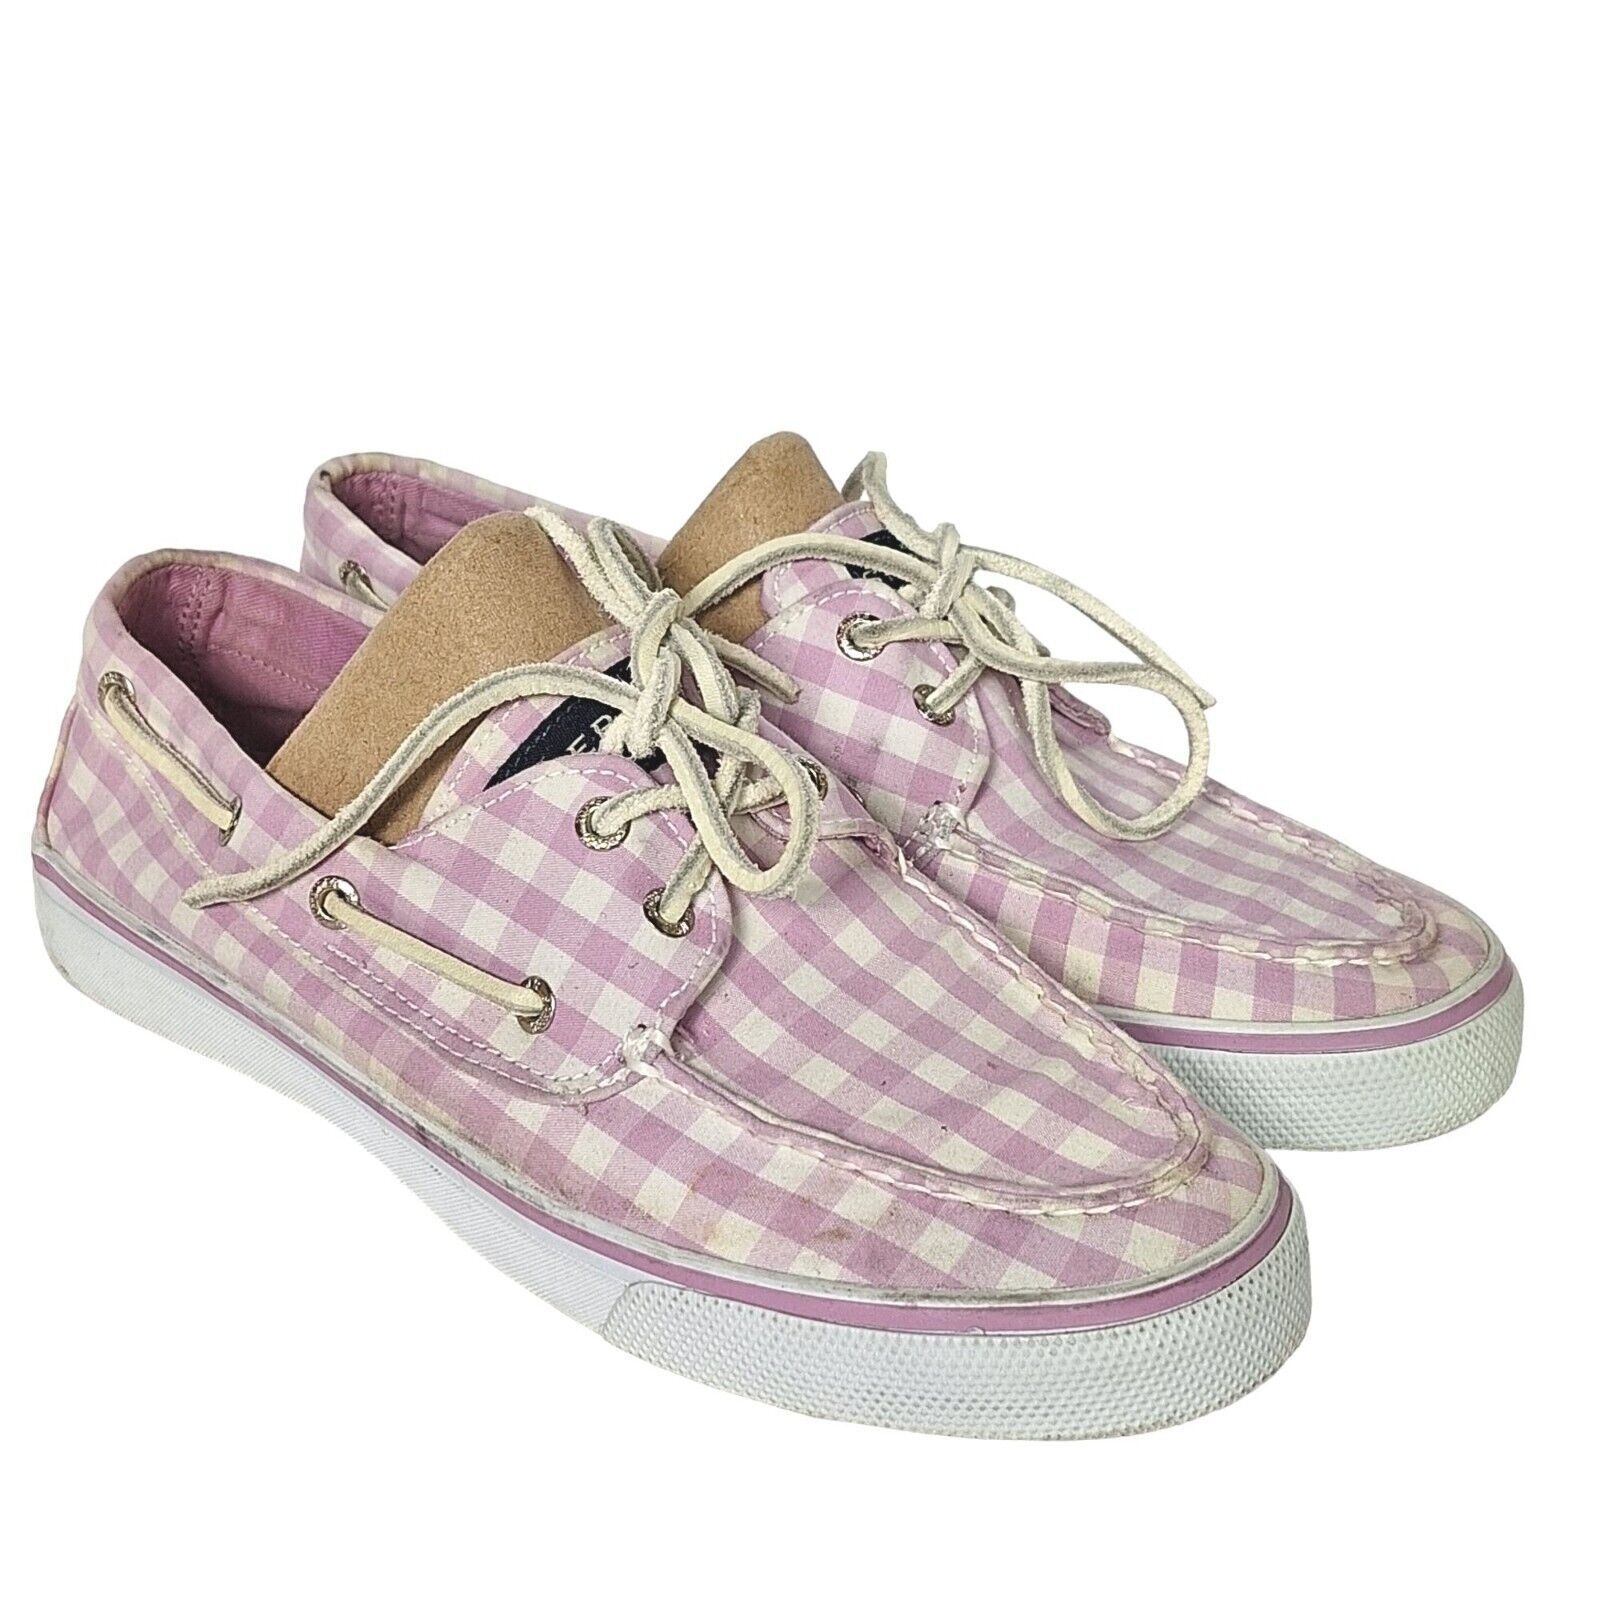 Primary image for Sperry Top Sider Bahama Pink White Gingham Checkered Boat Shoes Size 8 M